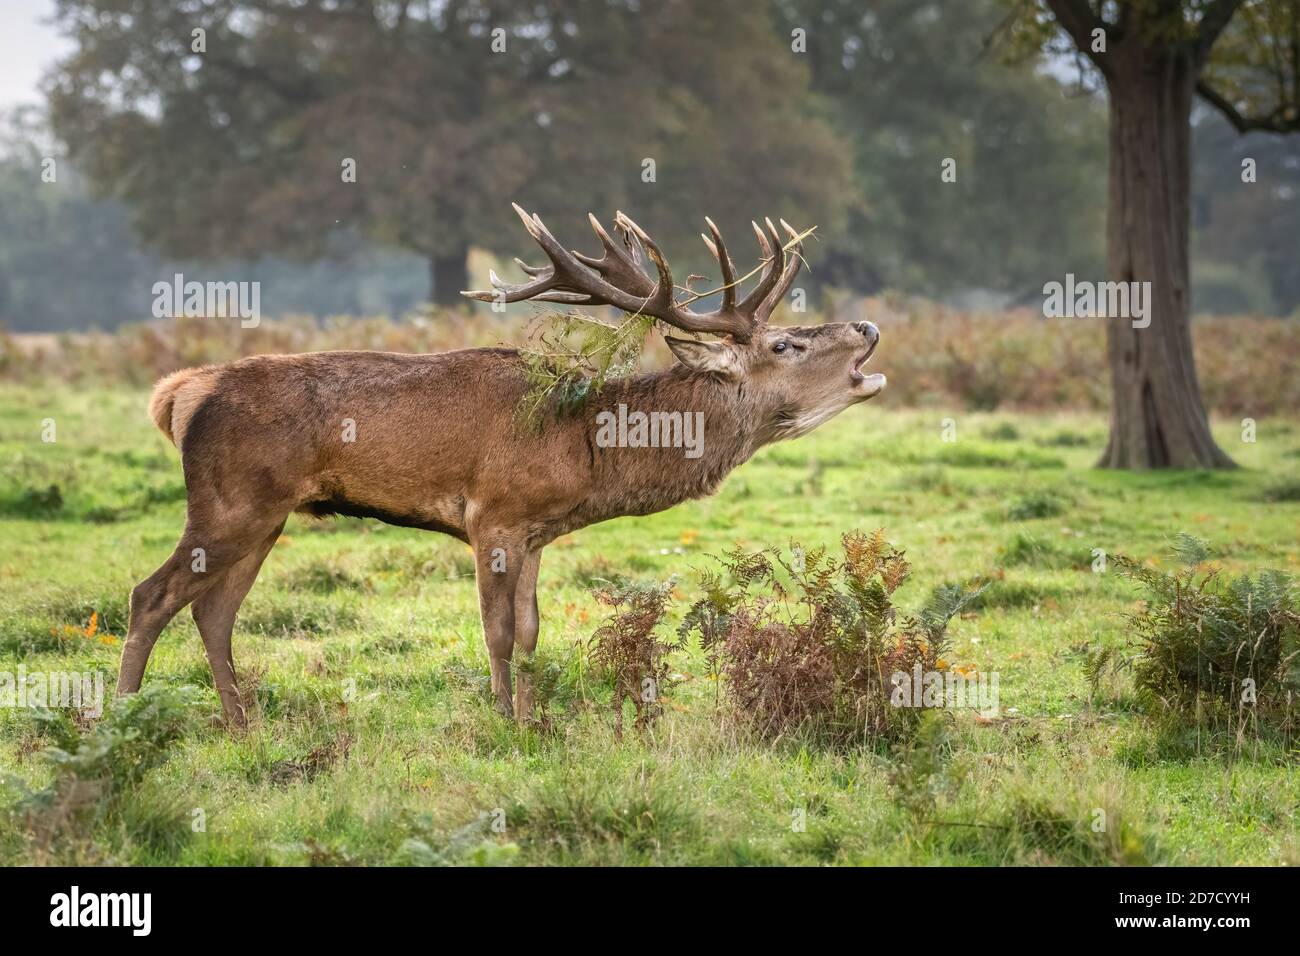 Red Deer Stag, Bushy Park, London Stock Photo